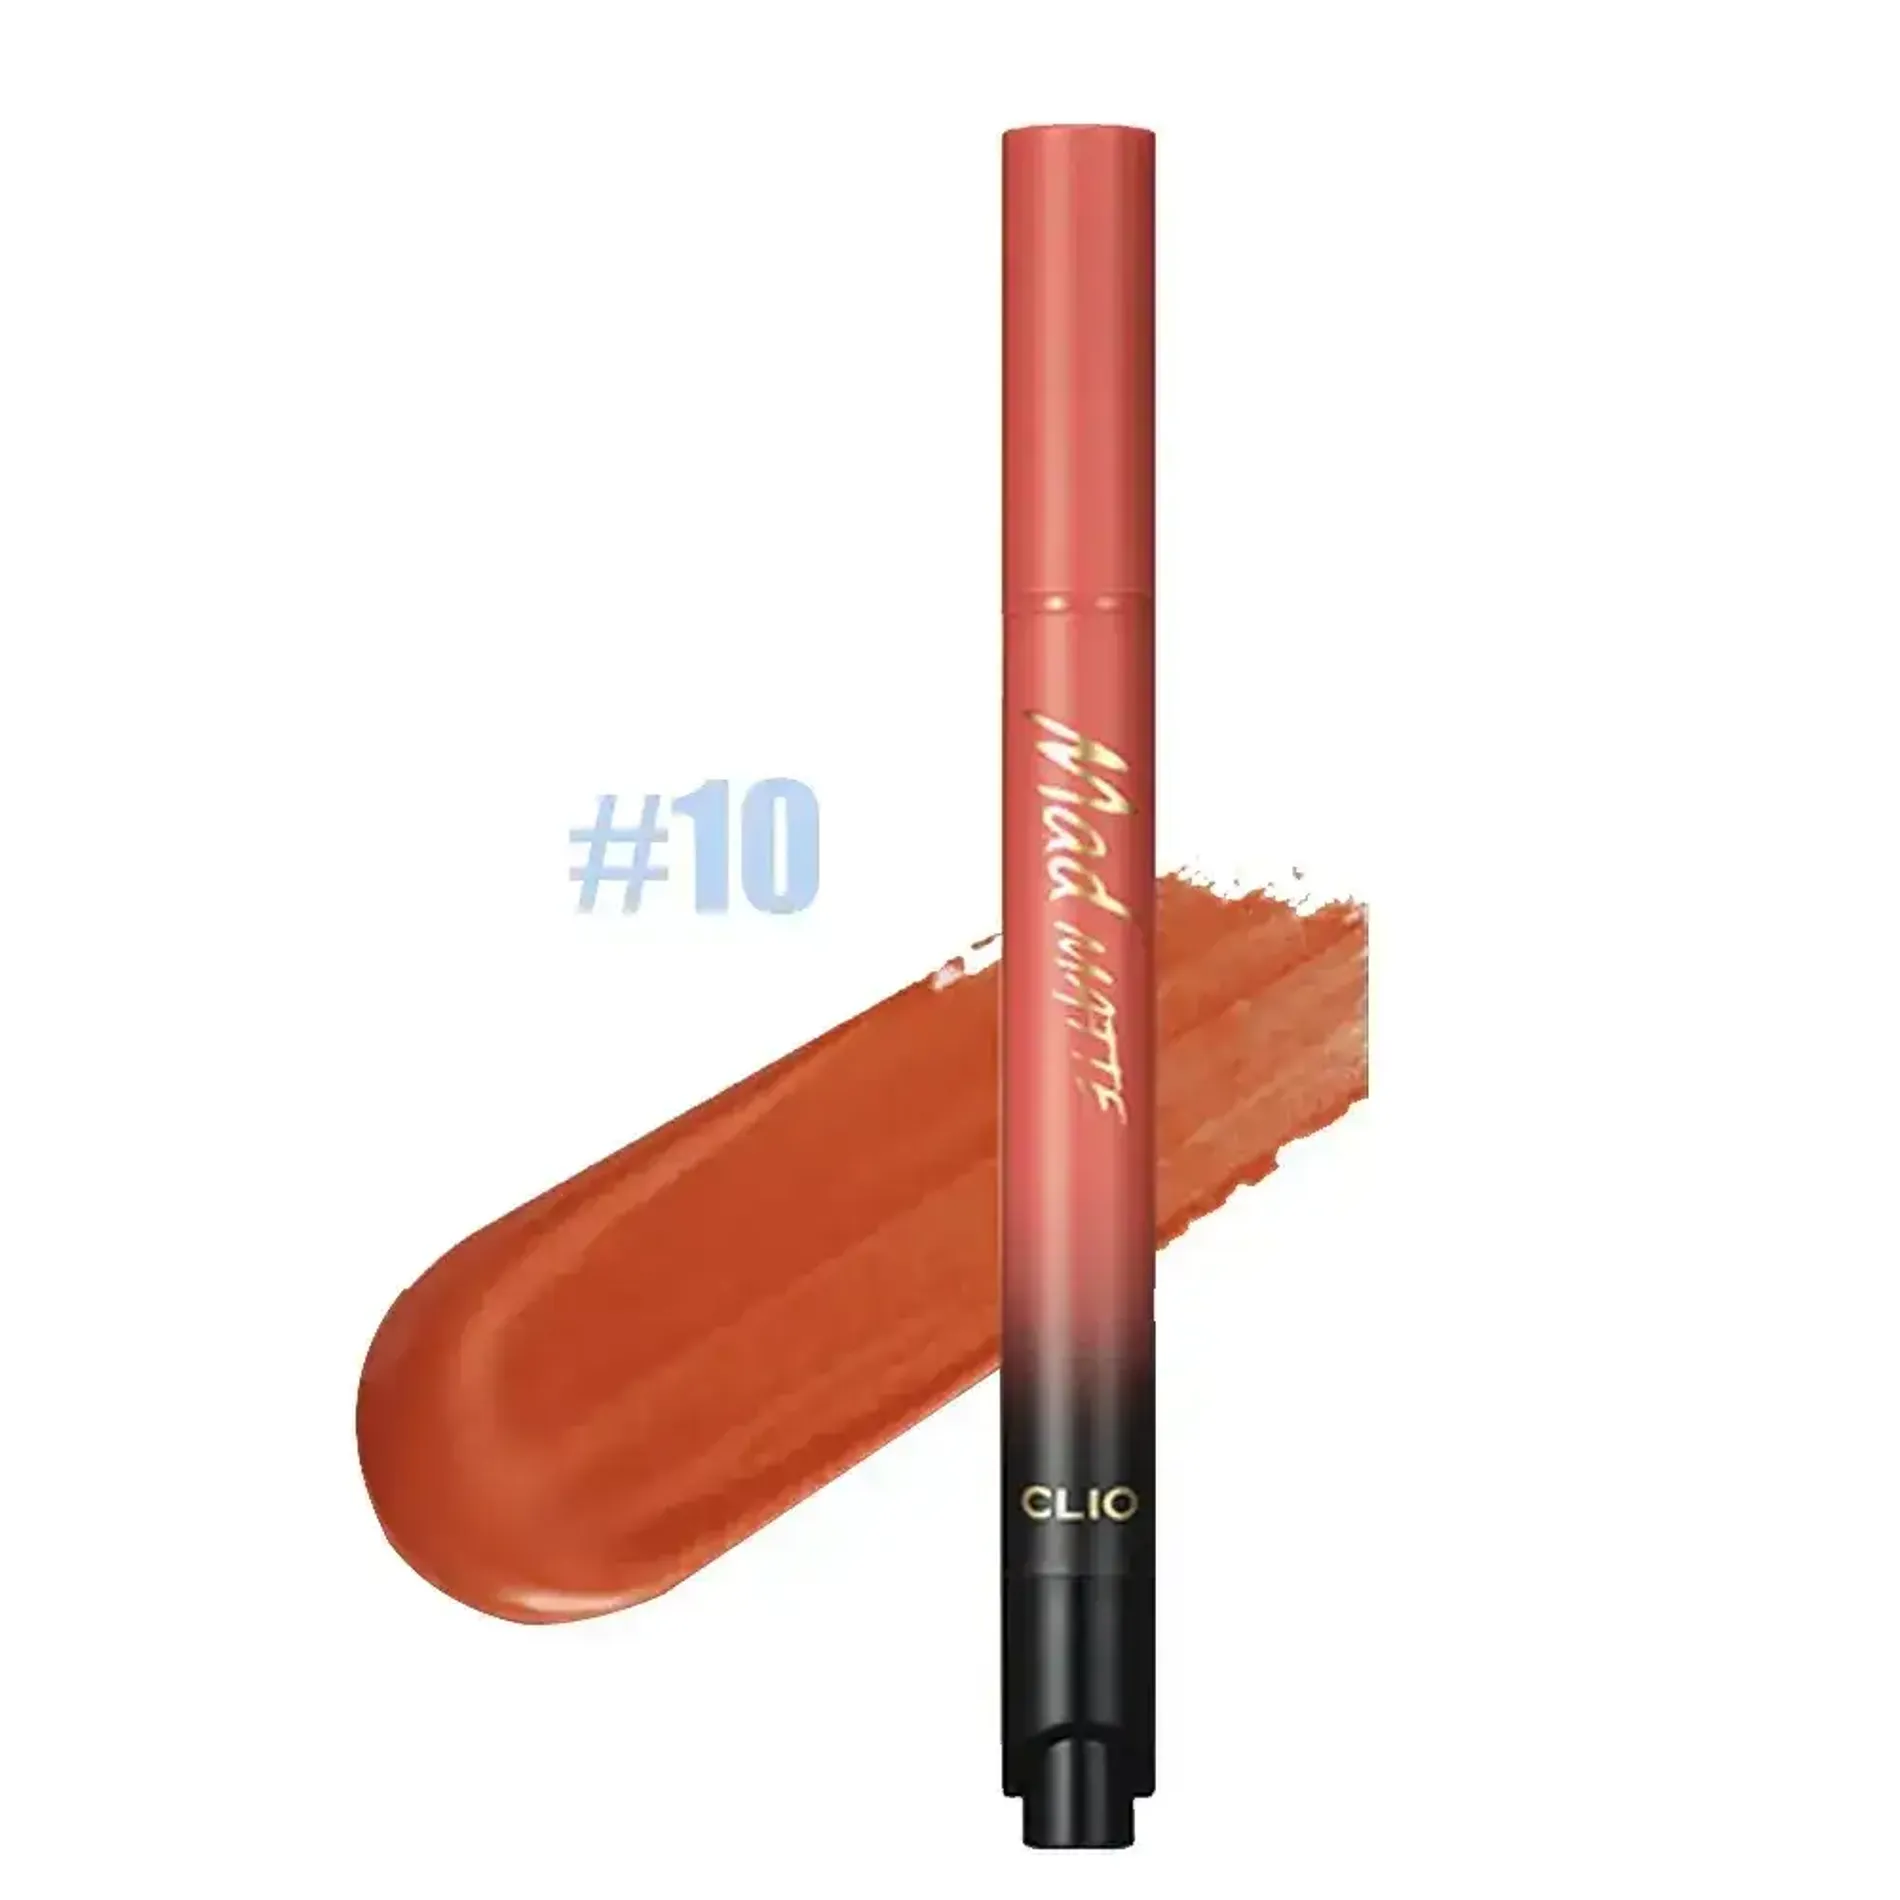 son-nuoc-dang-bam-clio-mad-matte-stain-tint-2g-10